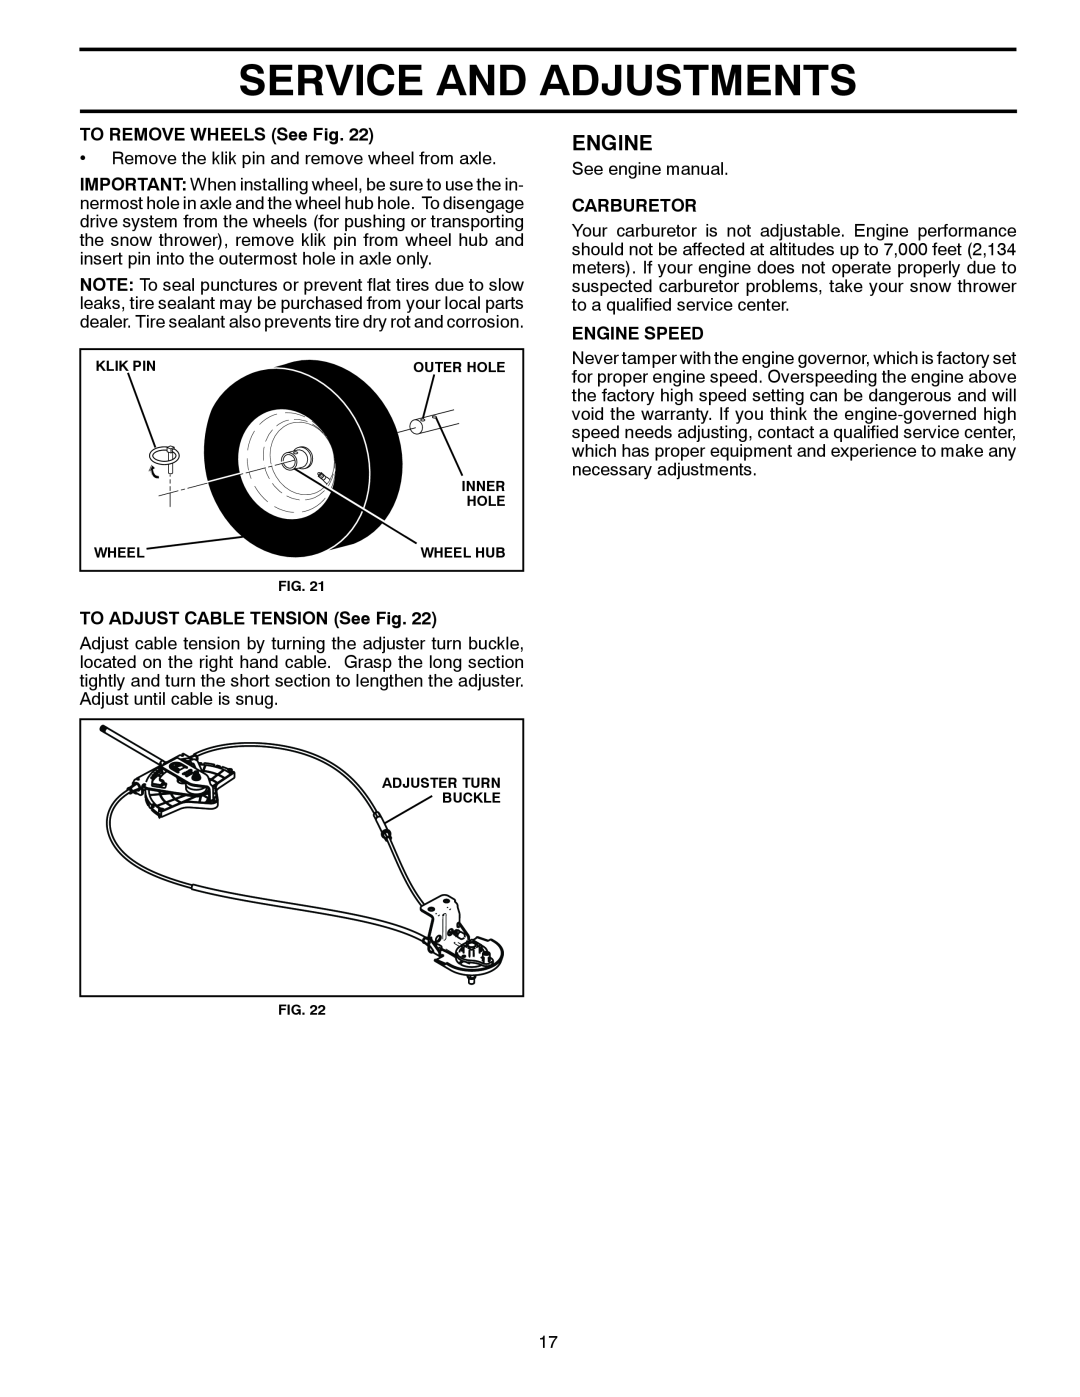 Poulan 96192003301 Service And Adjustments, Engine, TO REMOVE WHEELS See Fig, TO ADJUST CABLE TENSION See Fig, Carburetor 